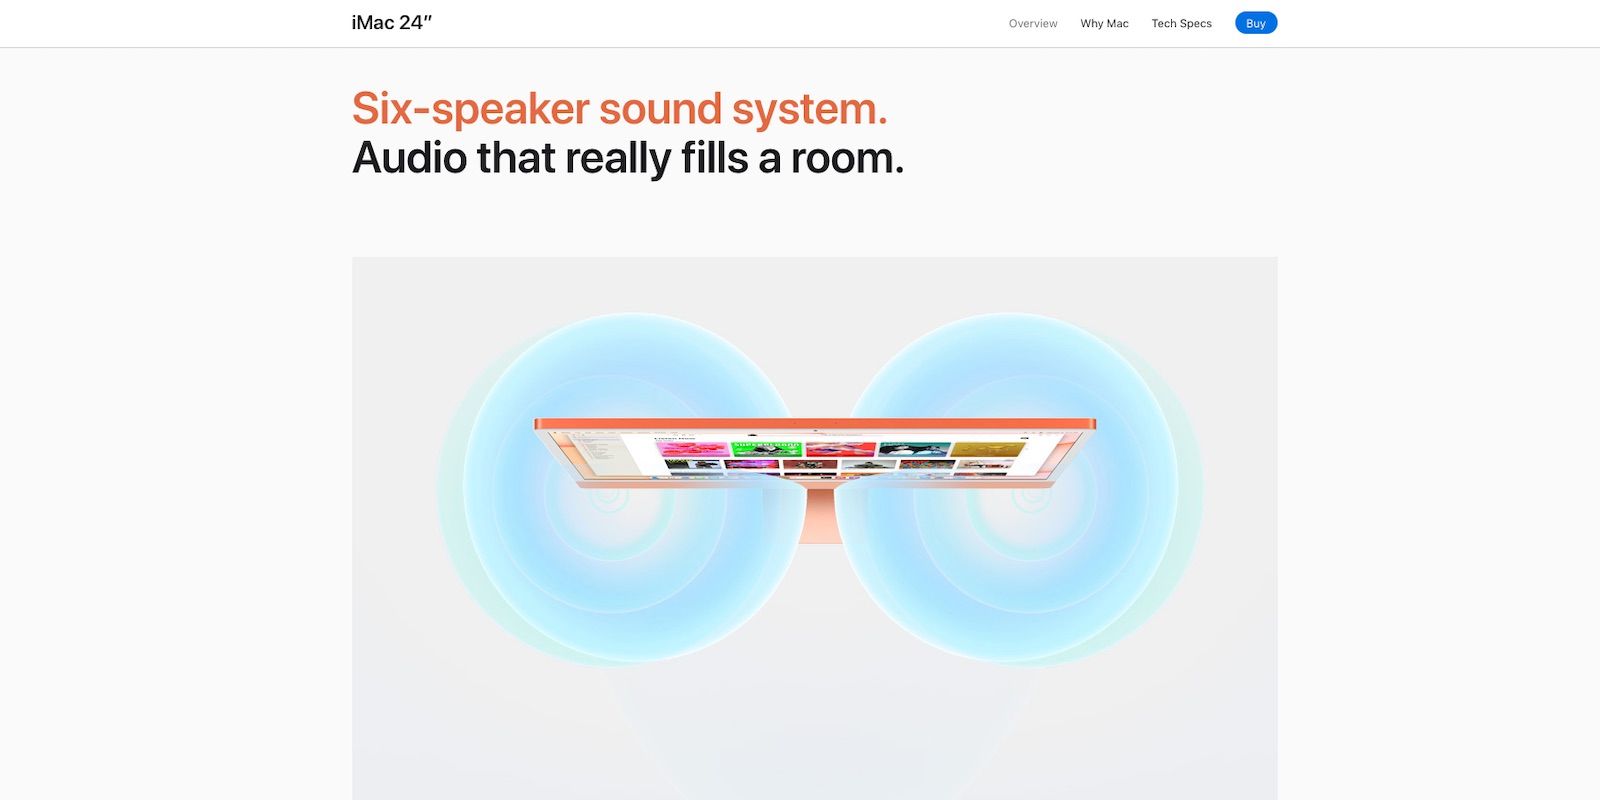 Screenshot from the Apple website showing an illustration of an iMac and speaker radius